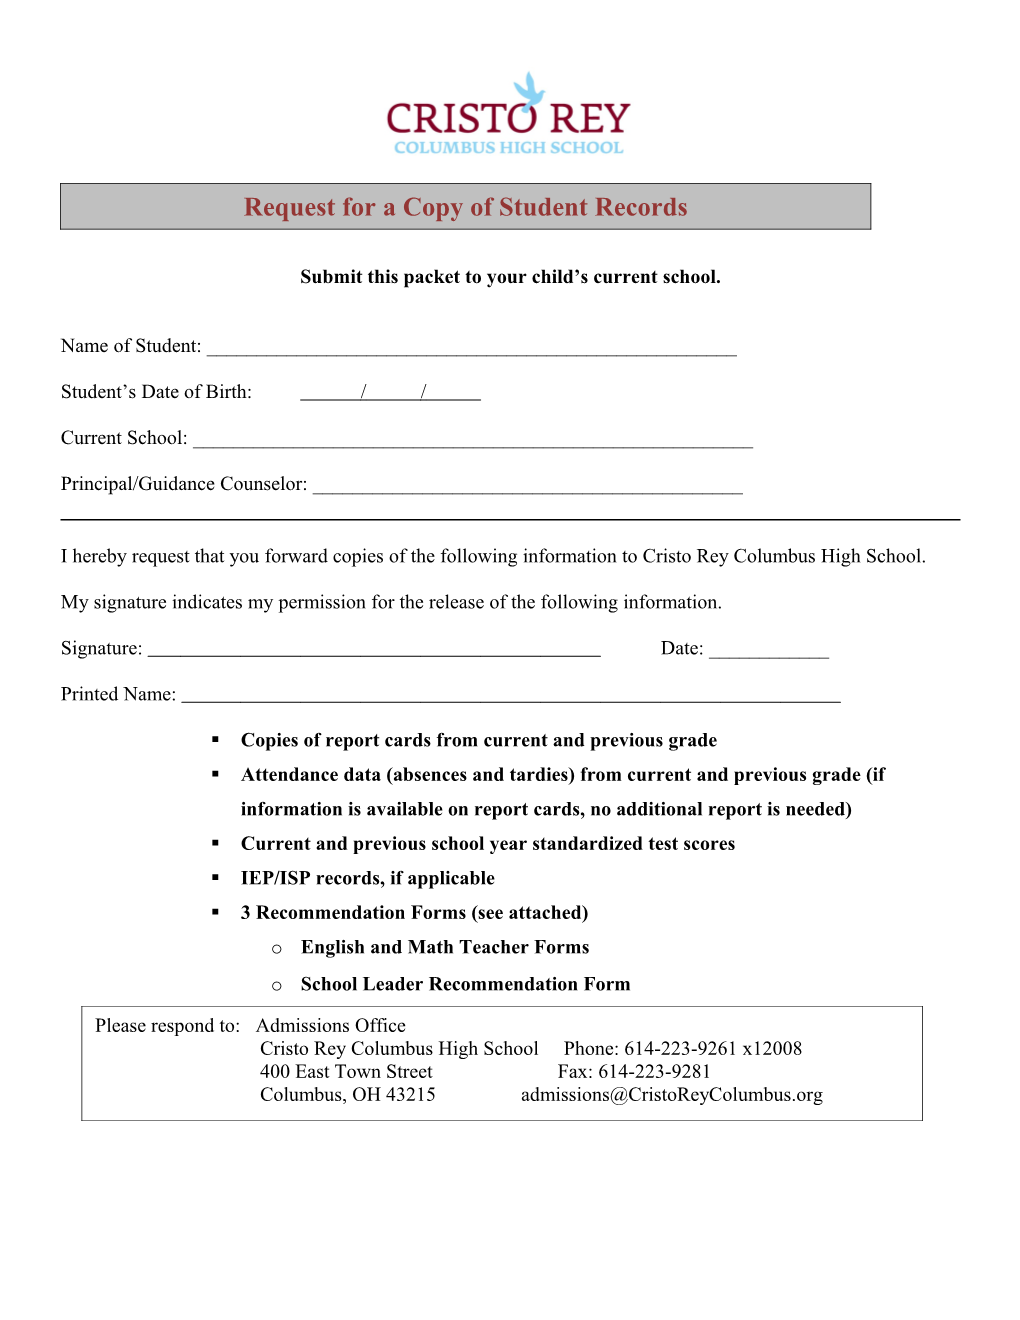 Submit This Packet to Your Child S Current School